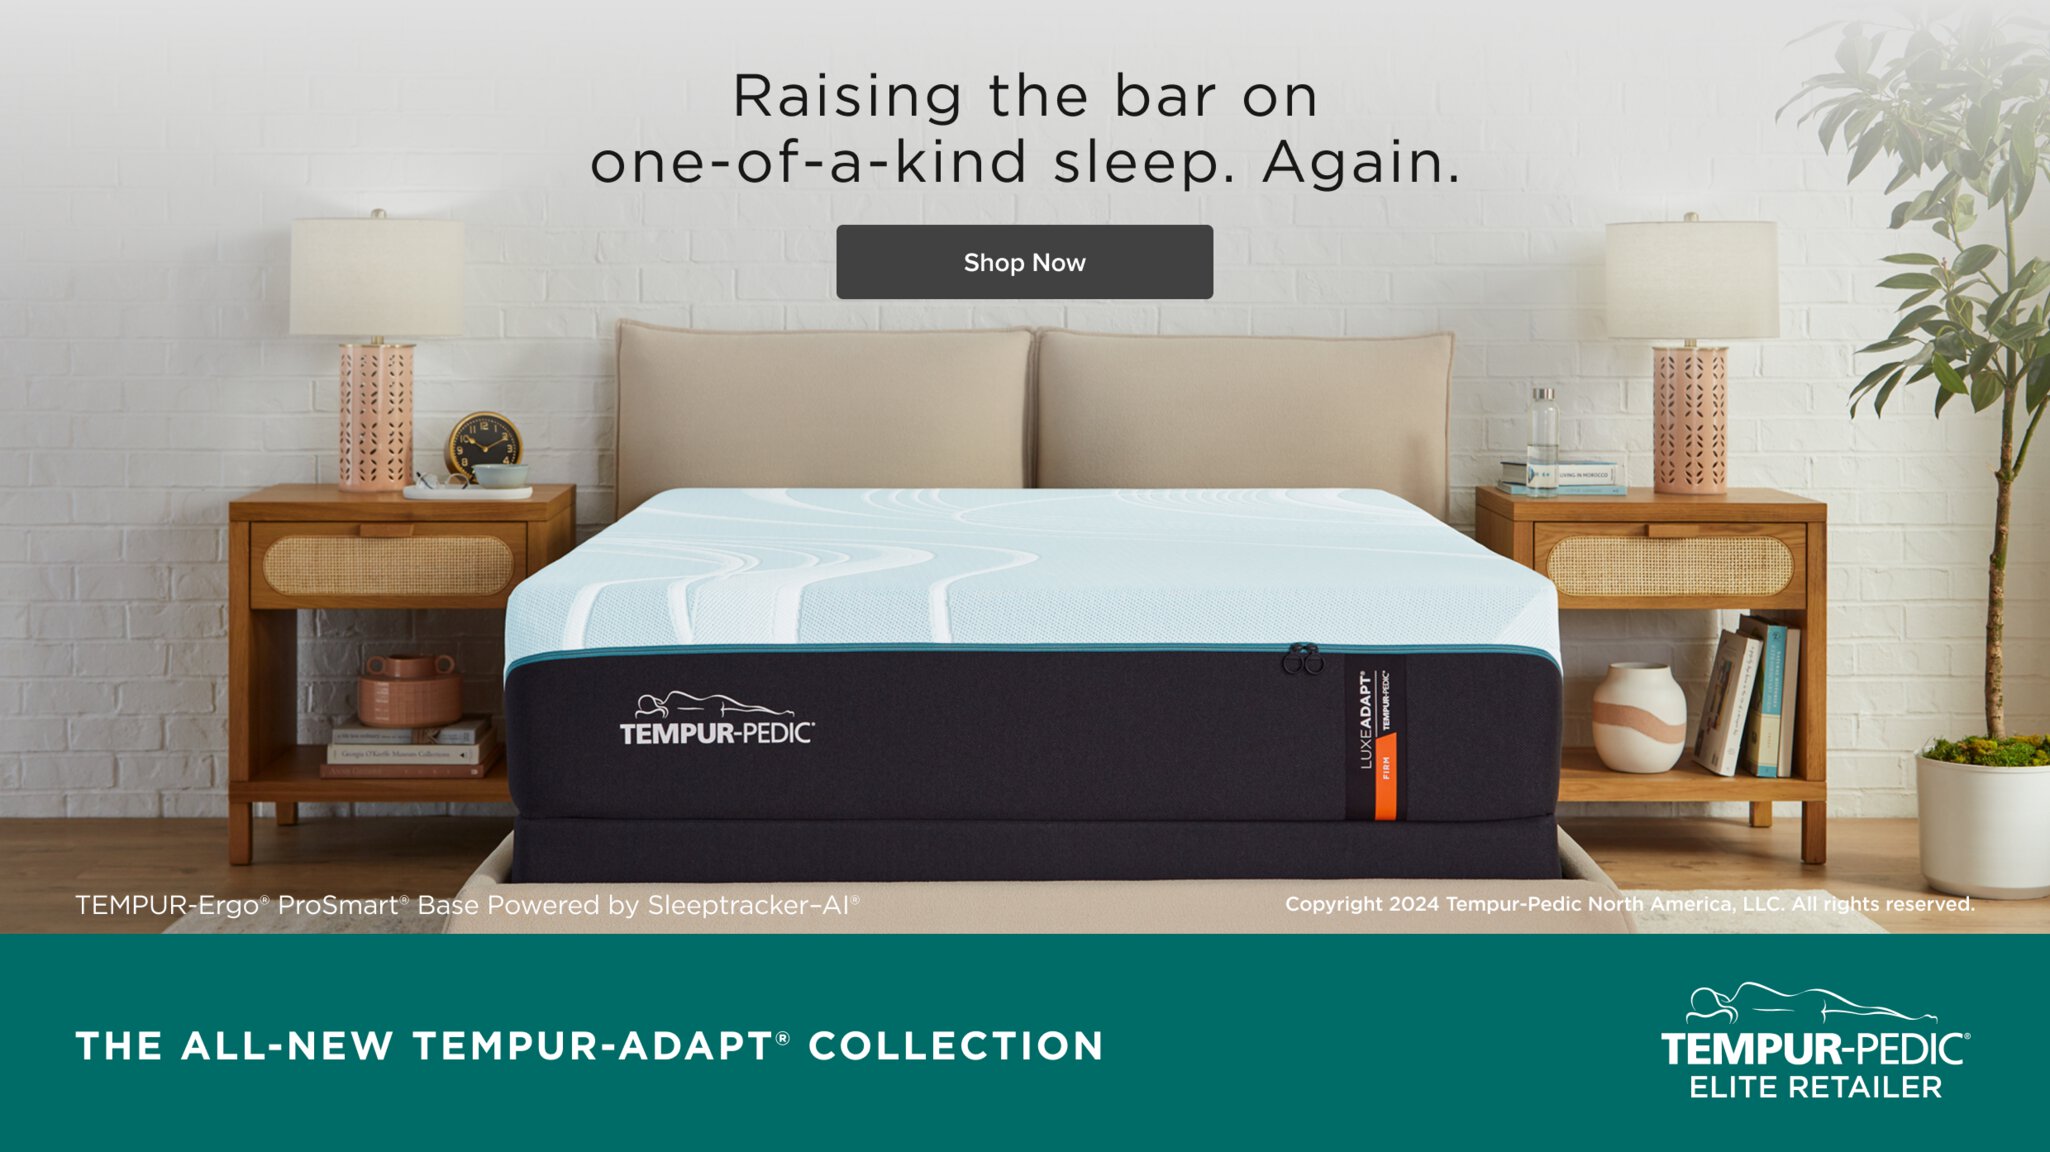 Get The all-new tempur adapt collection